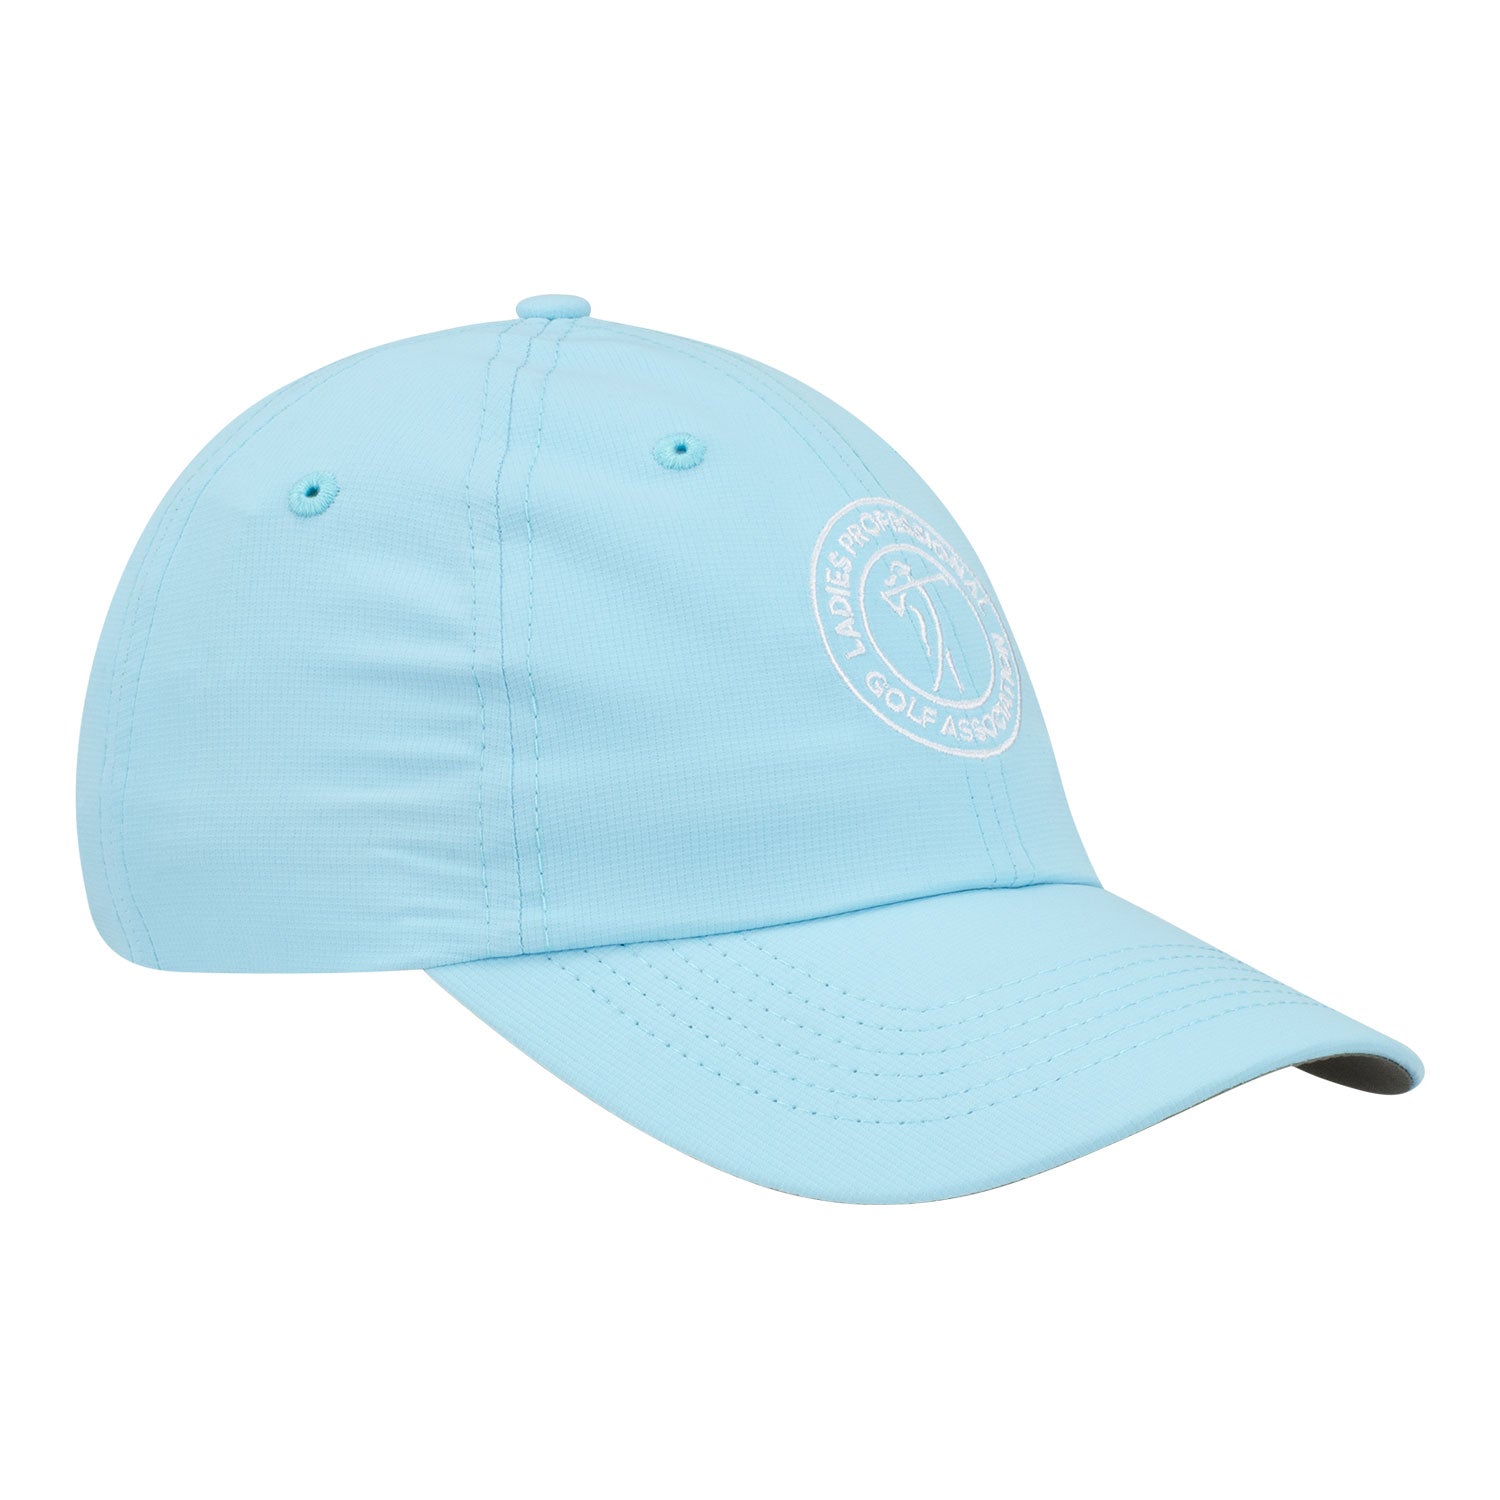 Imperial LPGA Women's Hat in Blue - Angled Right Side View